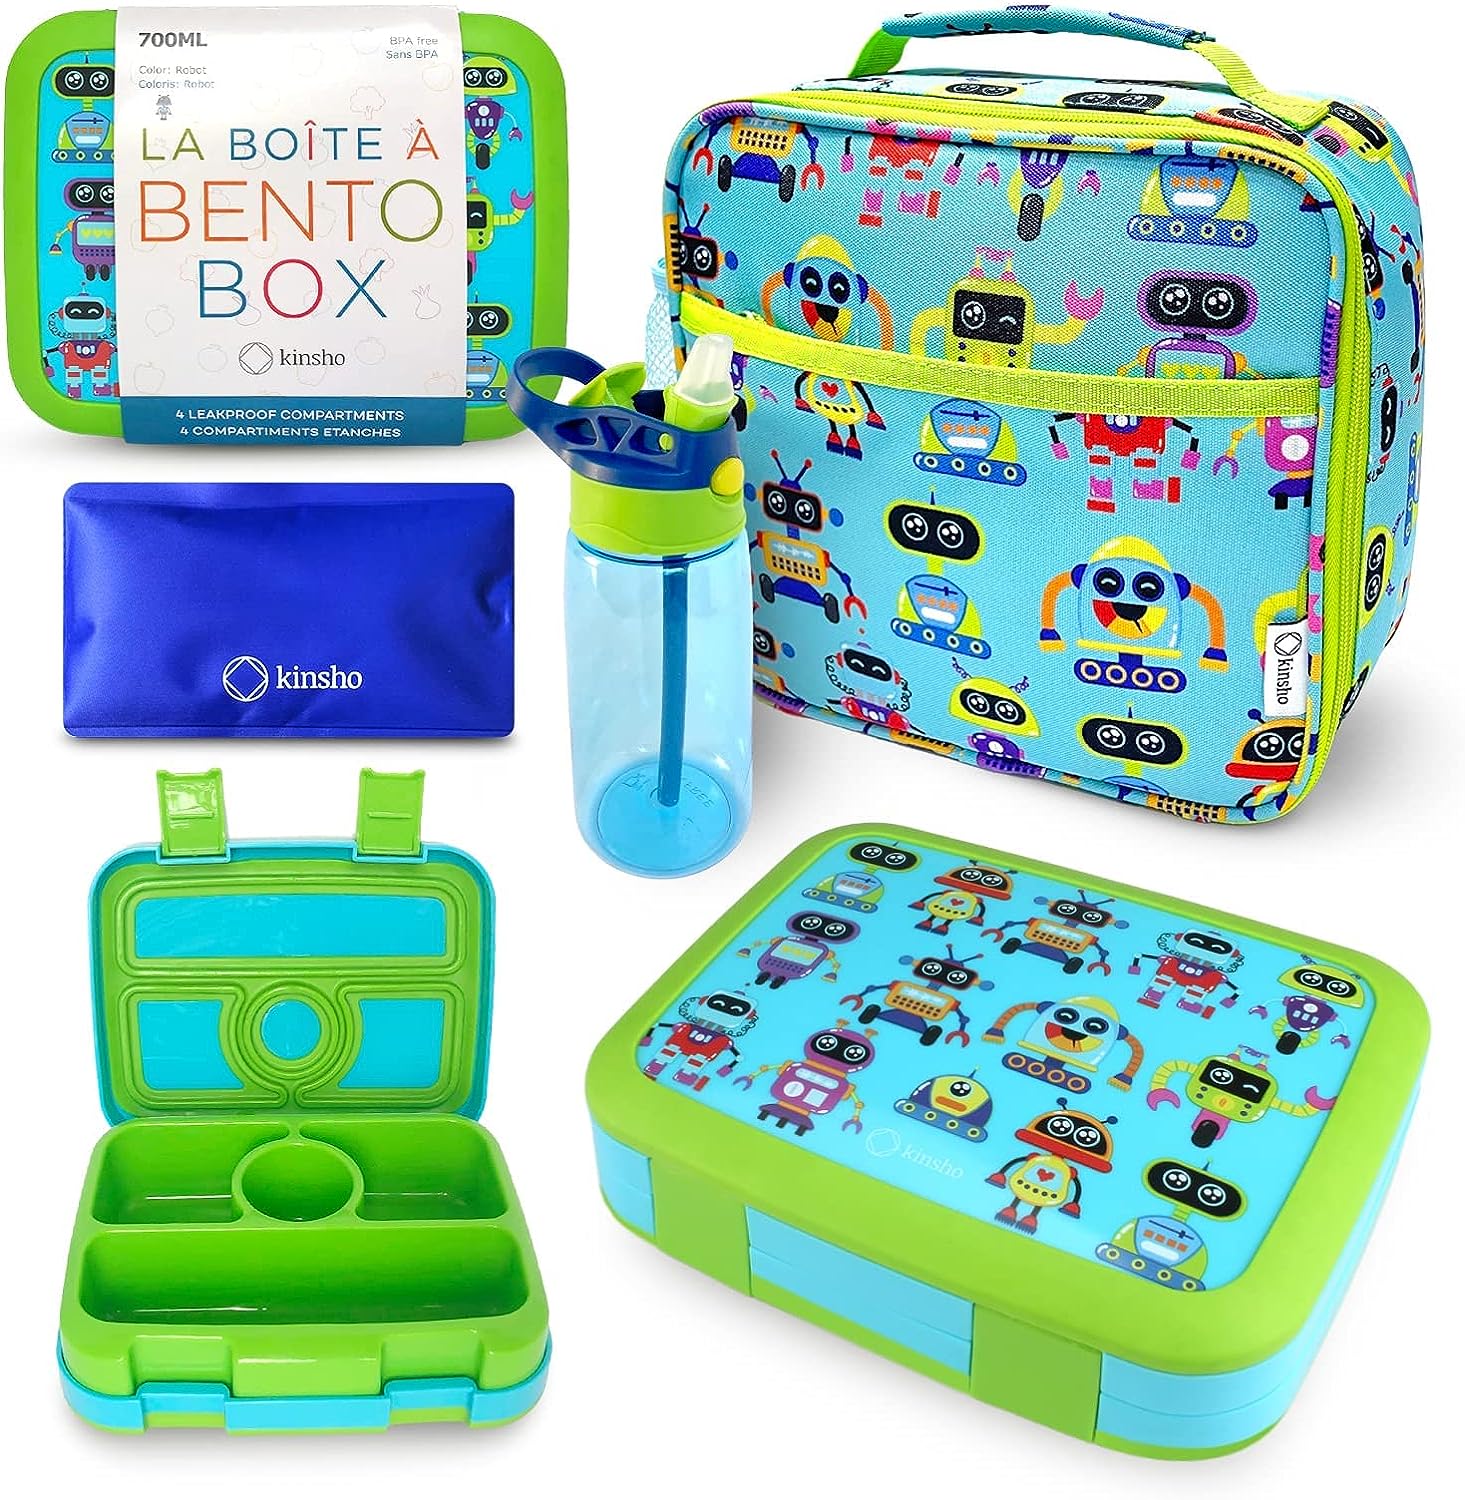 Bentgo Kids Stainless Steel Prints Leak-Resistant Lunch Box - New Improved  2022 Bento-Style with Updated Latches, 3 Compartments & Bonus Container -  Eco-Friendly, Dishwasher Safe, BPA-Free (Dinosaur) 